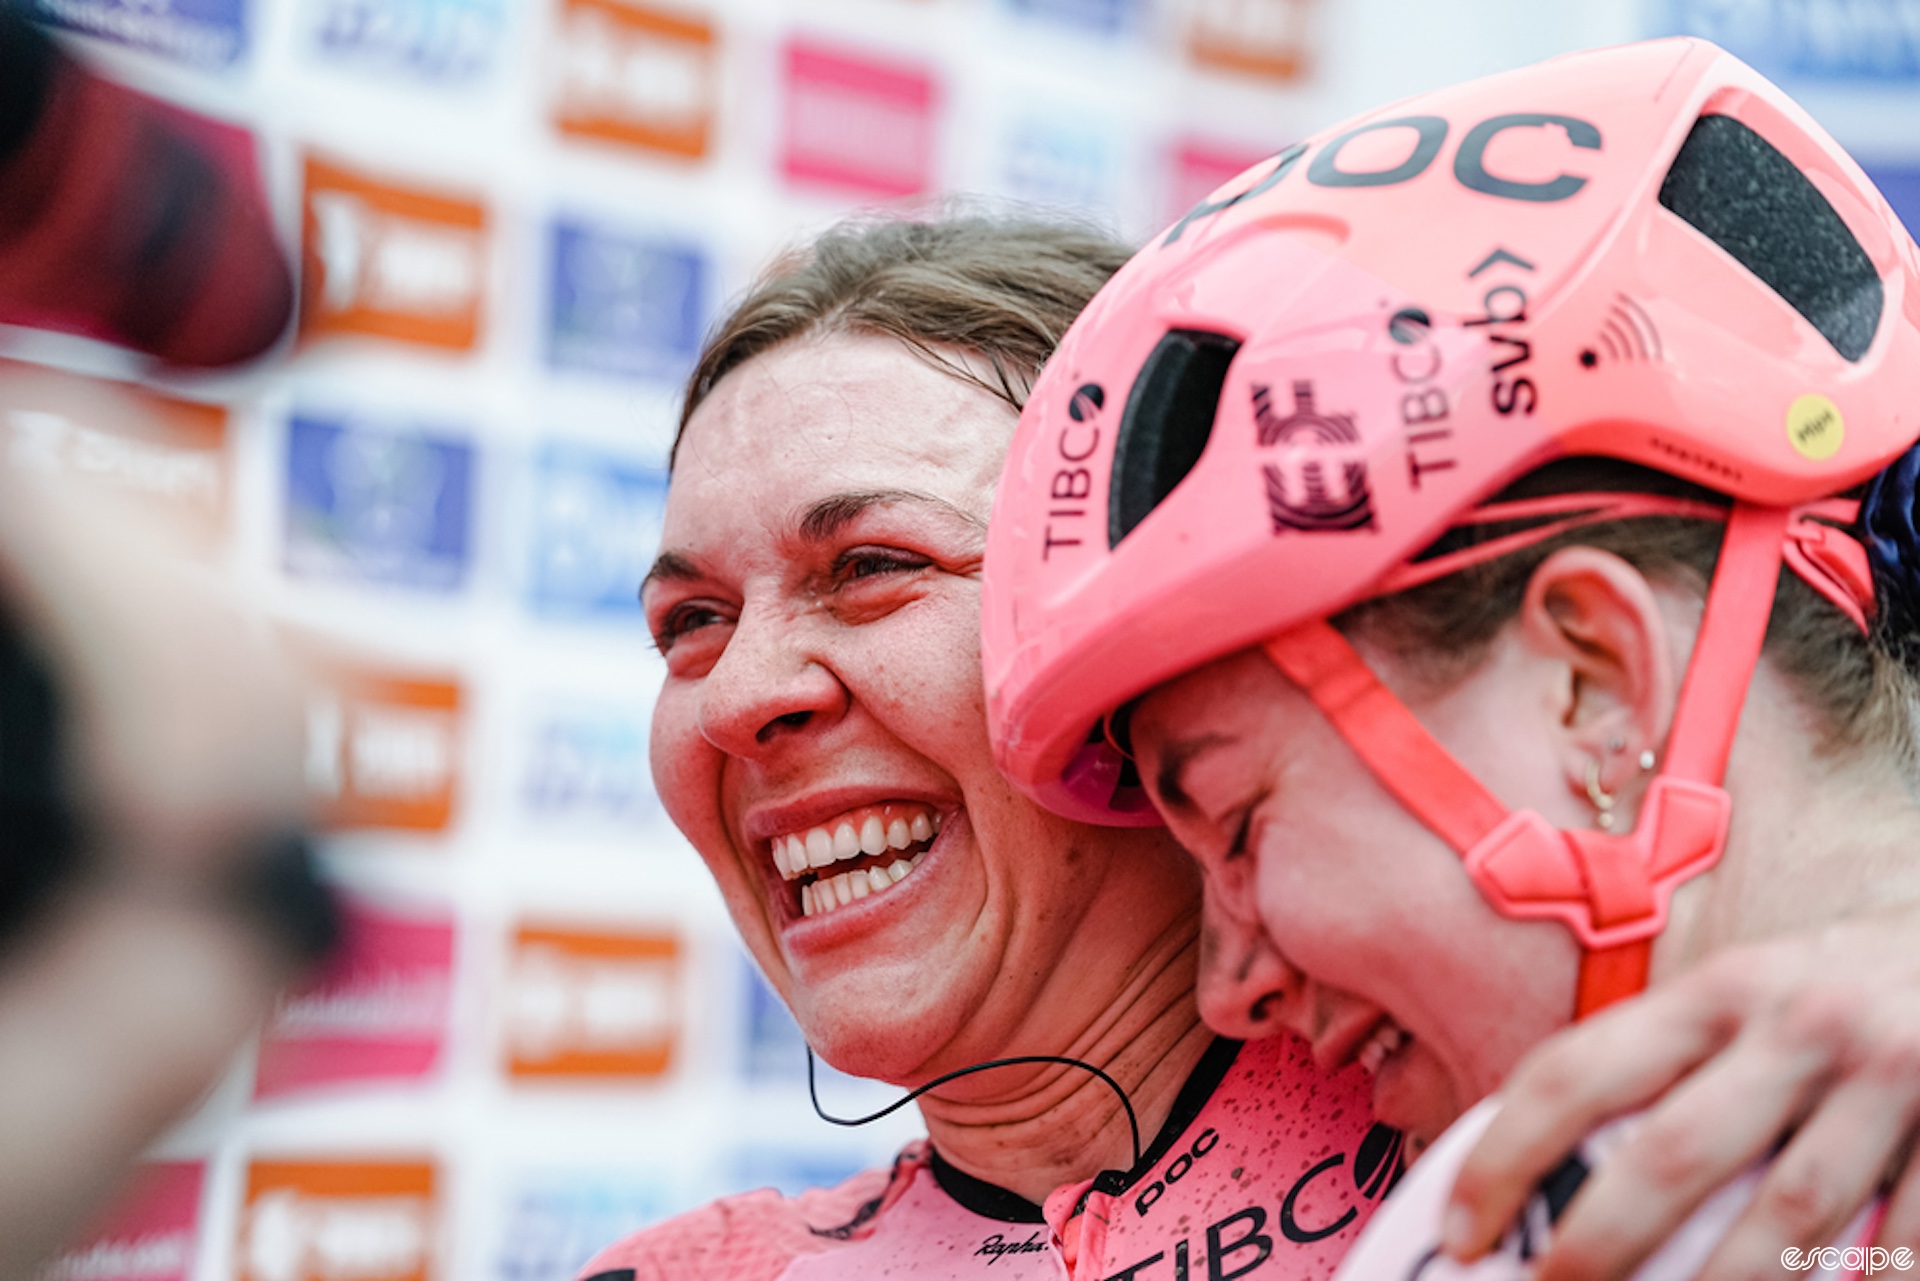 Alison Jackon smiles wide as she hugs a teammate after winning Paris-Roubaix. Her teammate has her eyes closed with deep emotion on her face as they embrace.